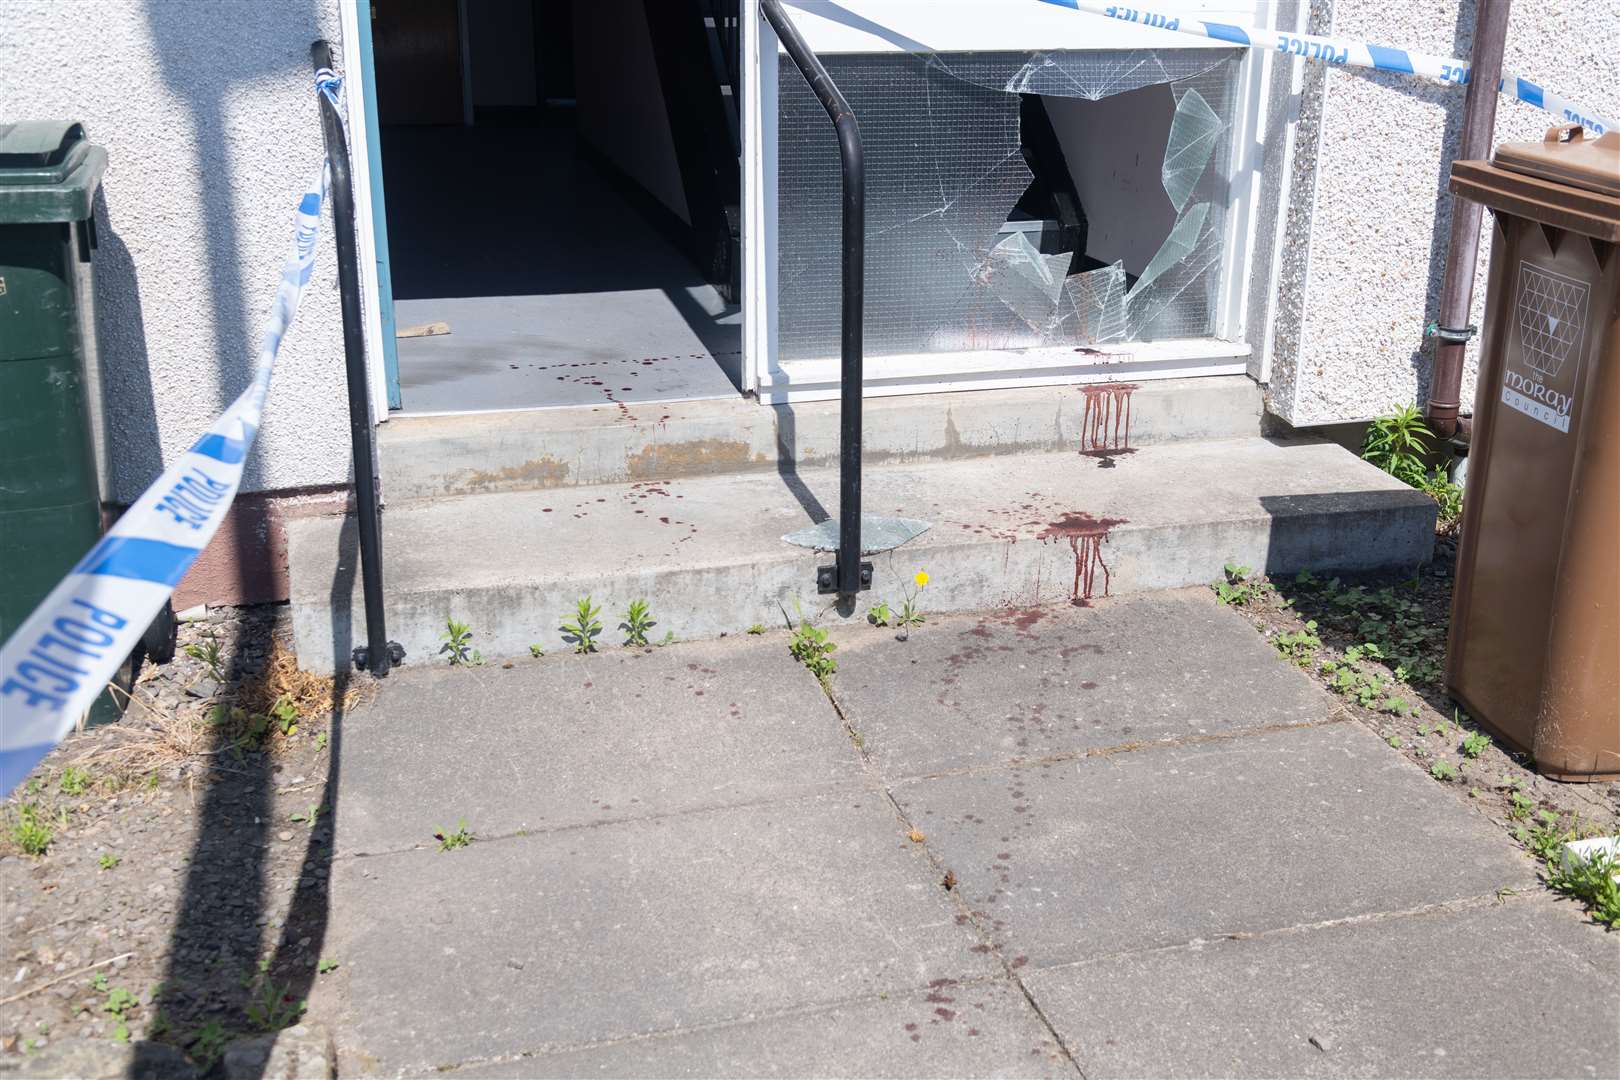 Blood on the concrete outside the home that police were called to...Picture: Beth Taylor.